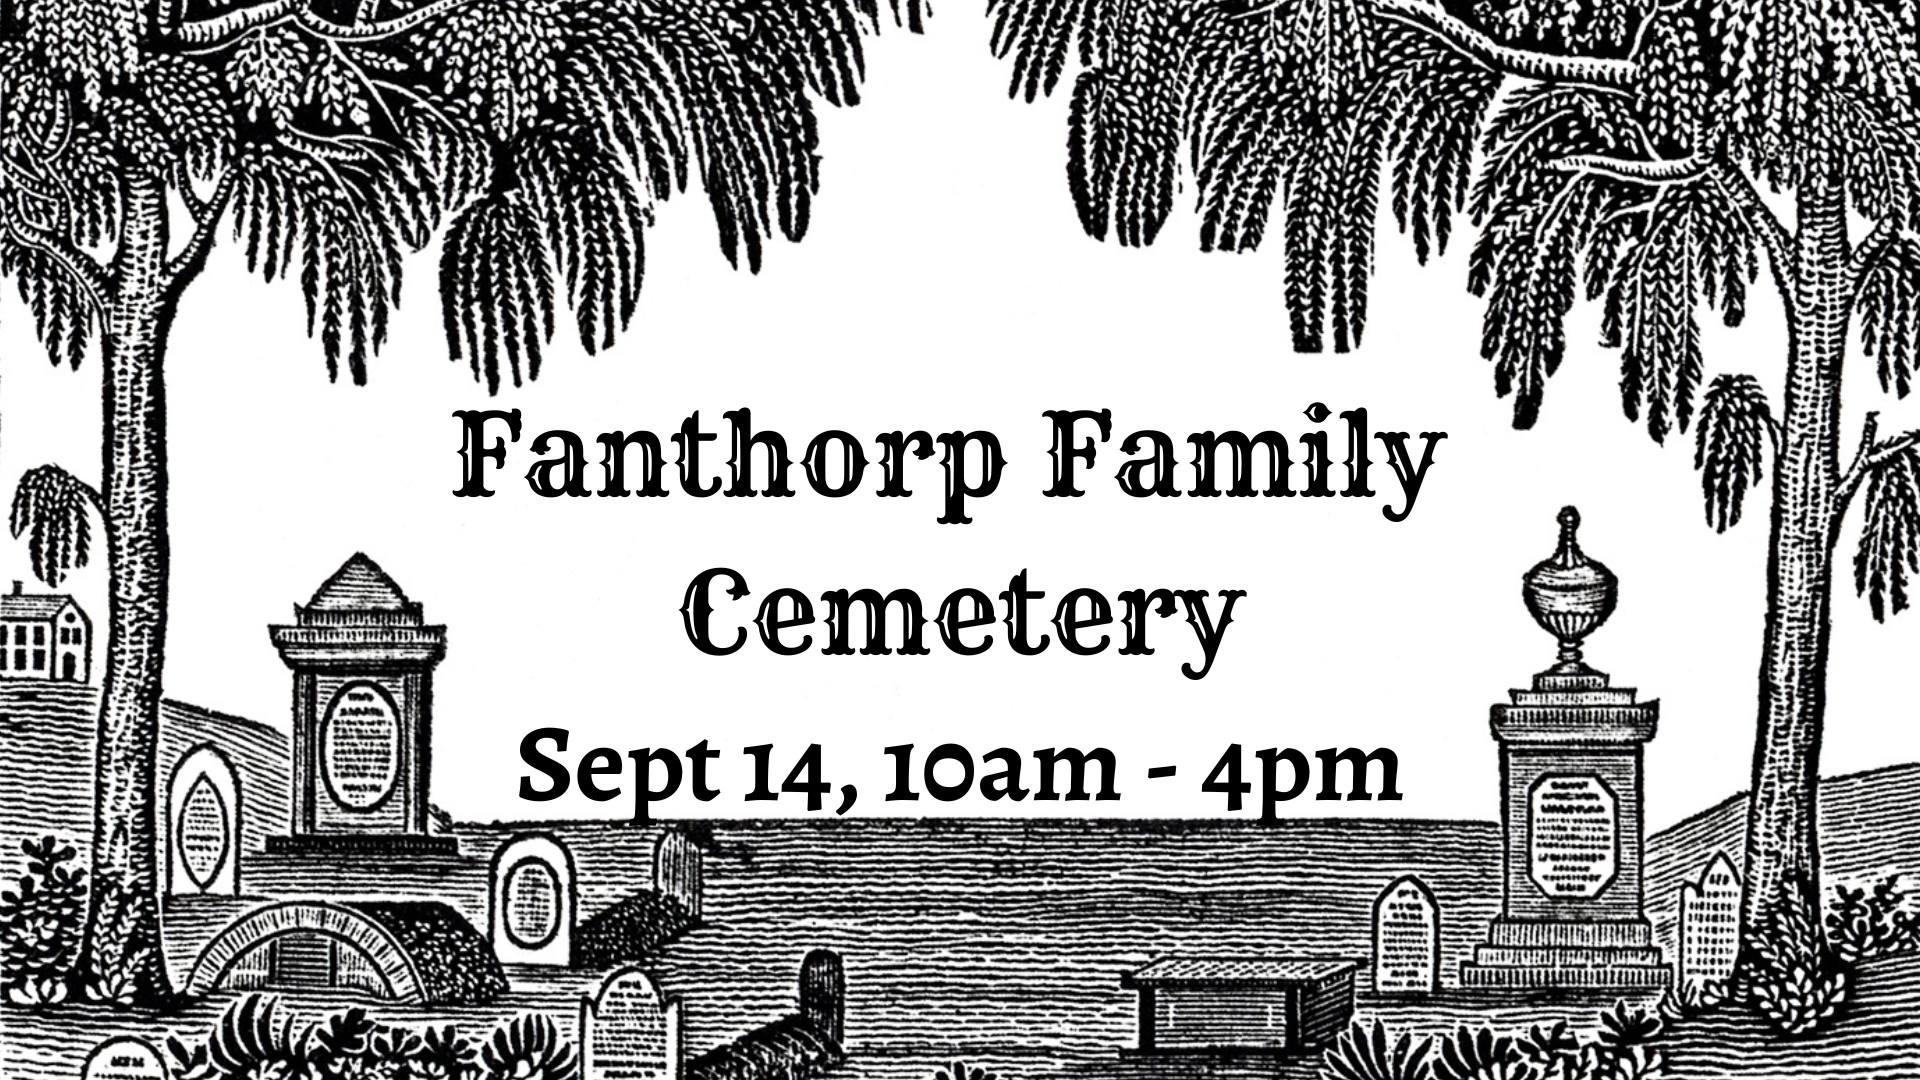 Fanthorp Family Cemetery